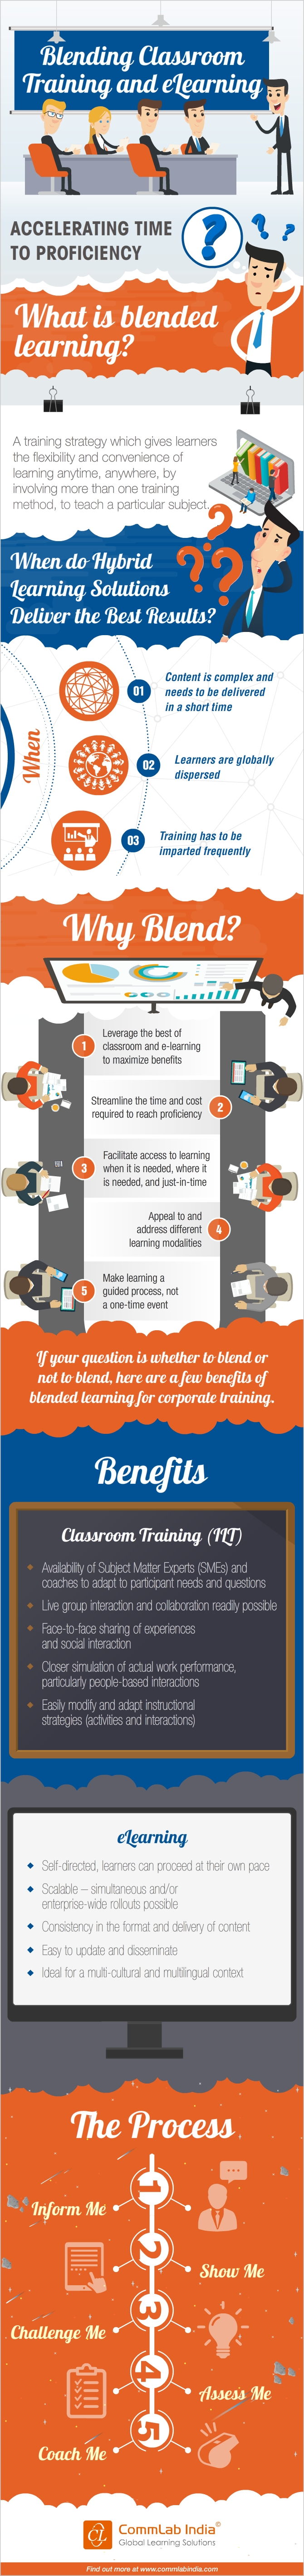 Blending Classroom Training and eLearning [Infographic]